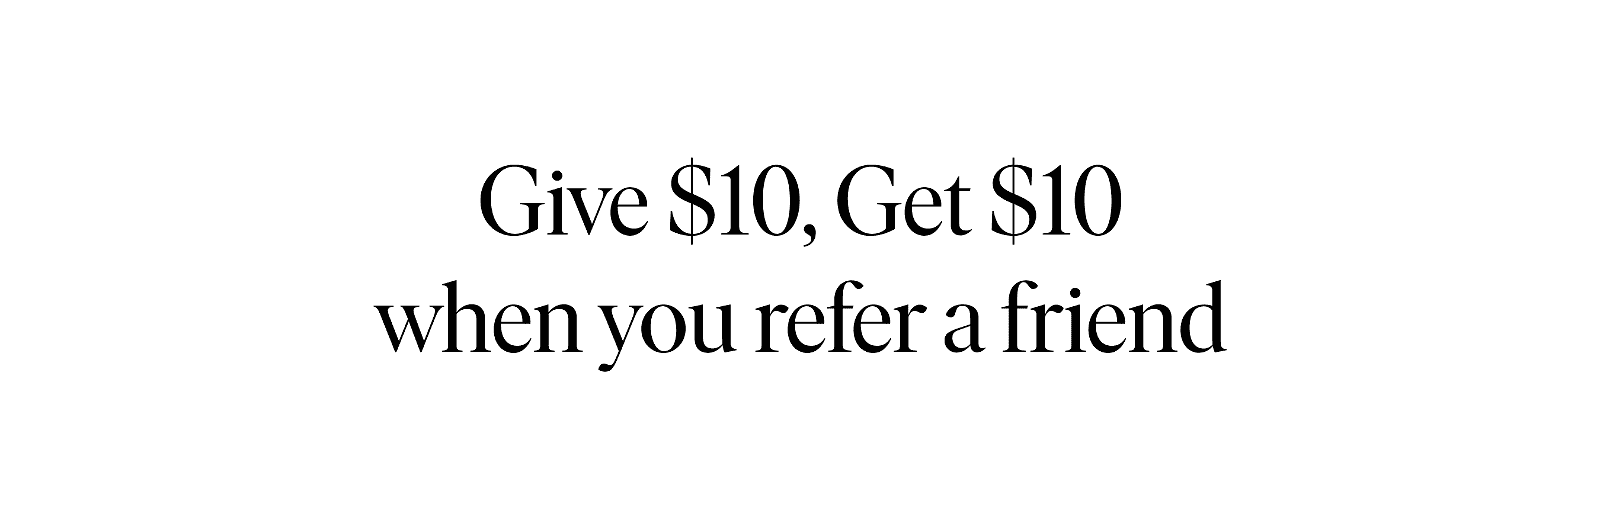 Give \\$10, Get \\$10 when you refer a friend